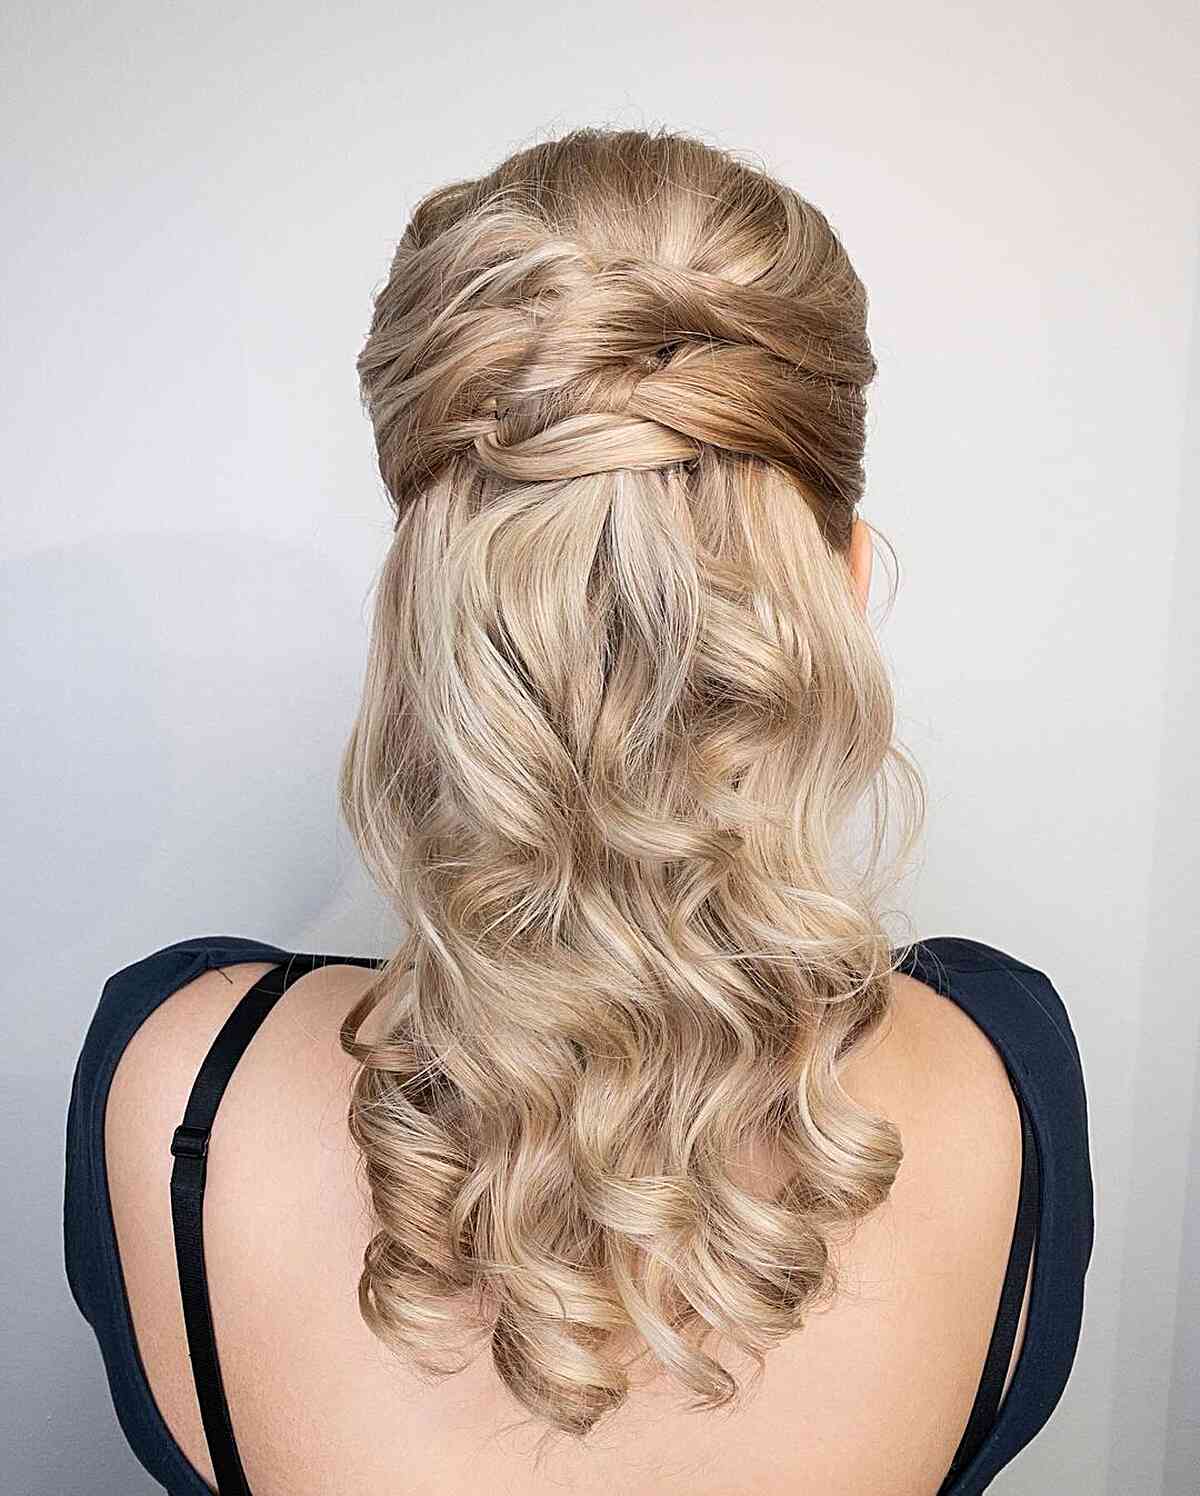 Double Twist Half-Down Prom Style with Curled Ends for Medium Hair